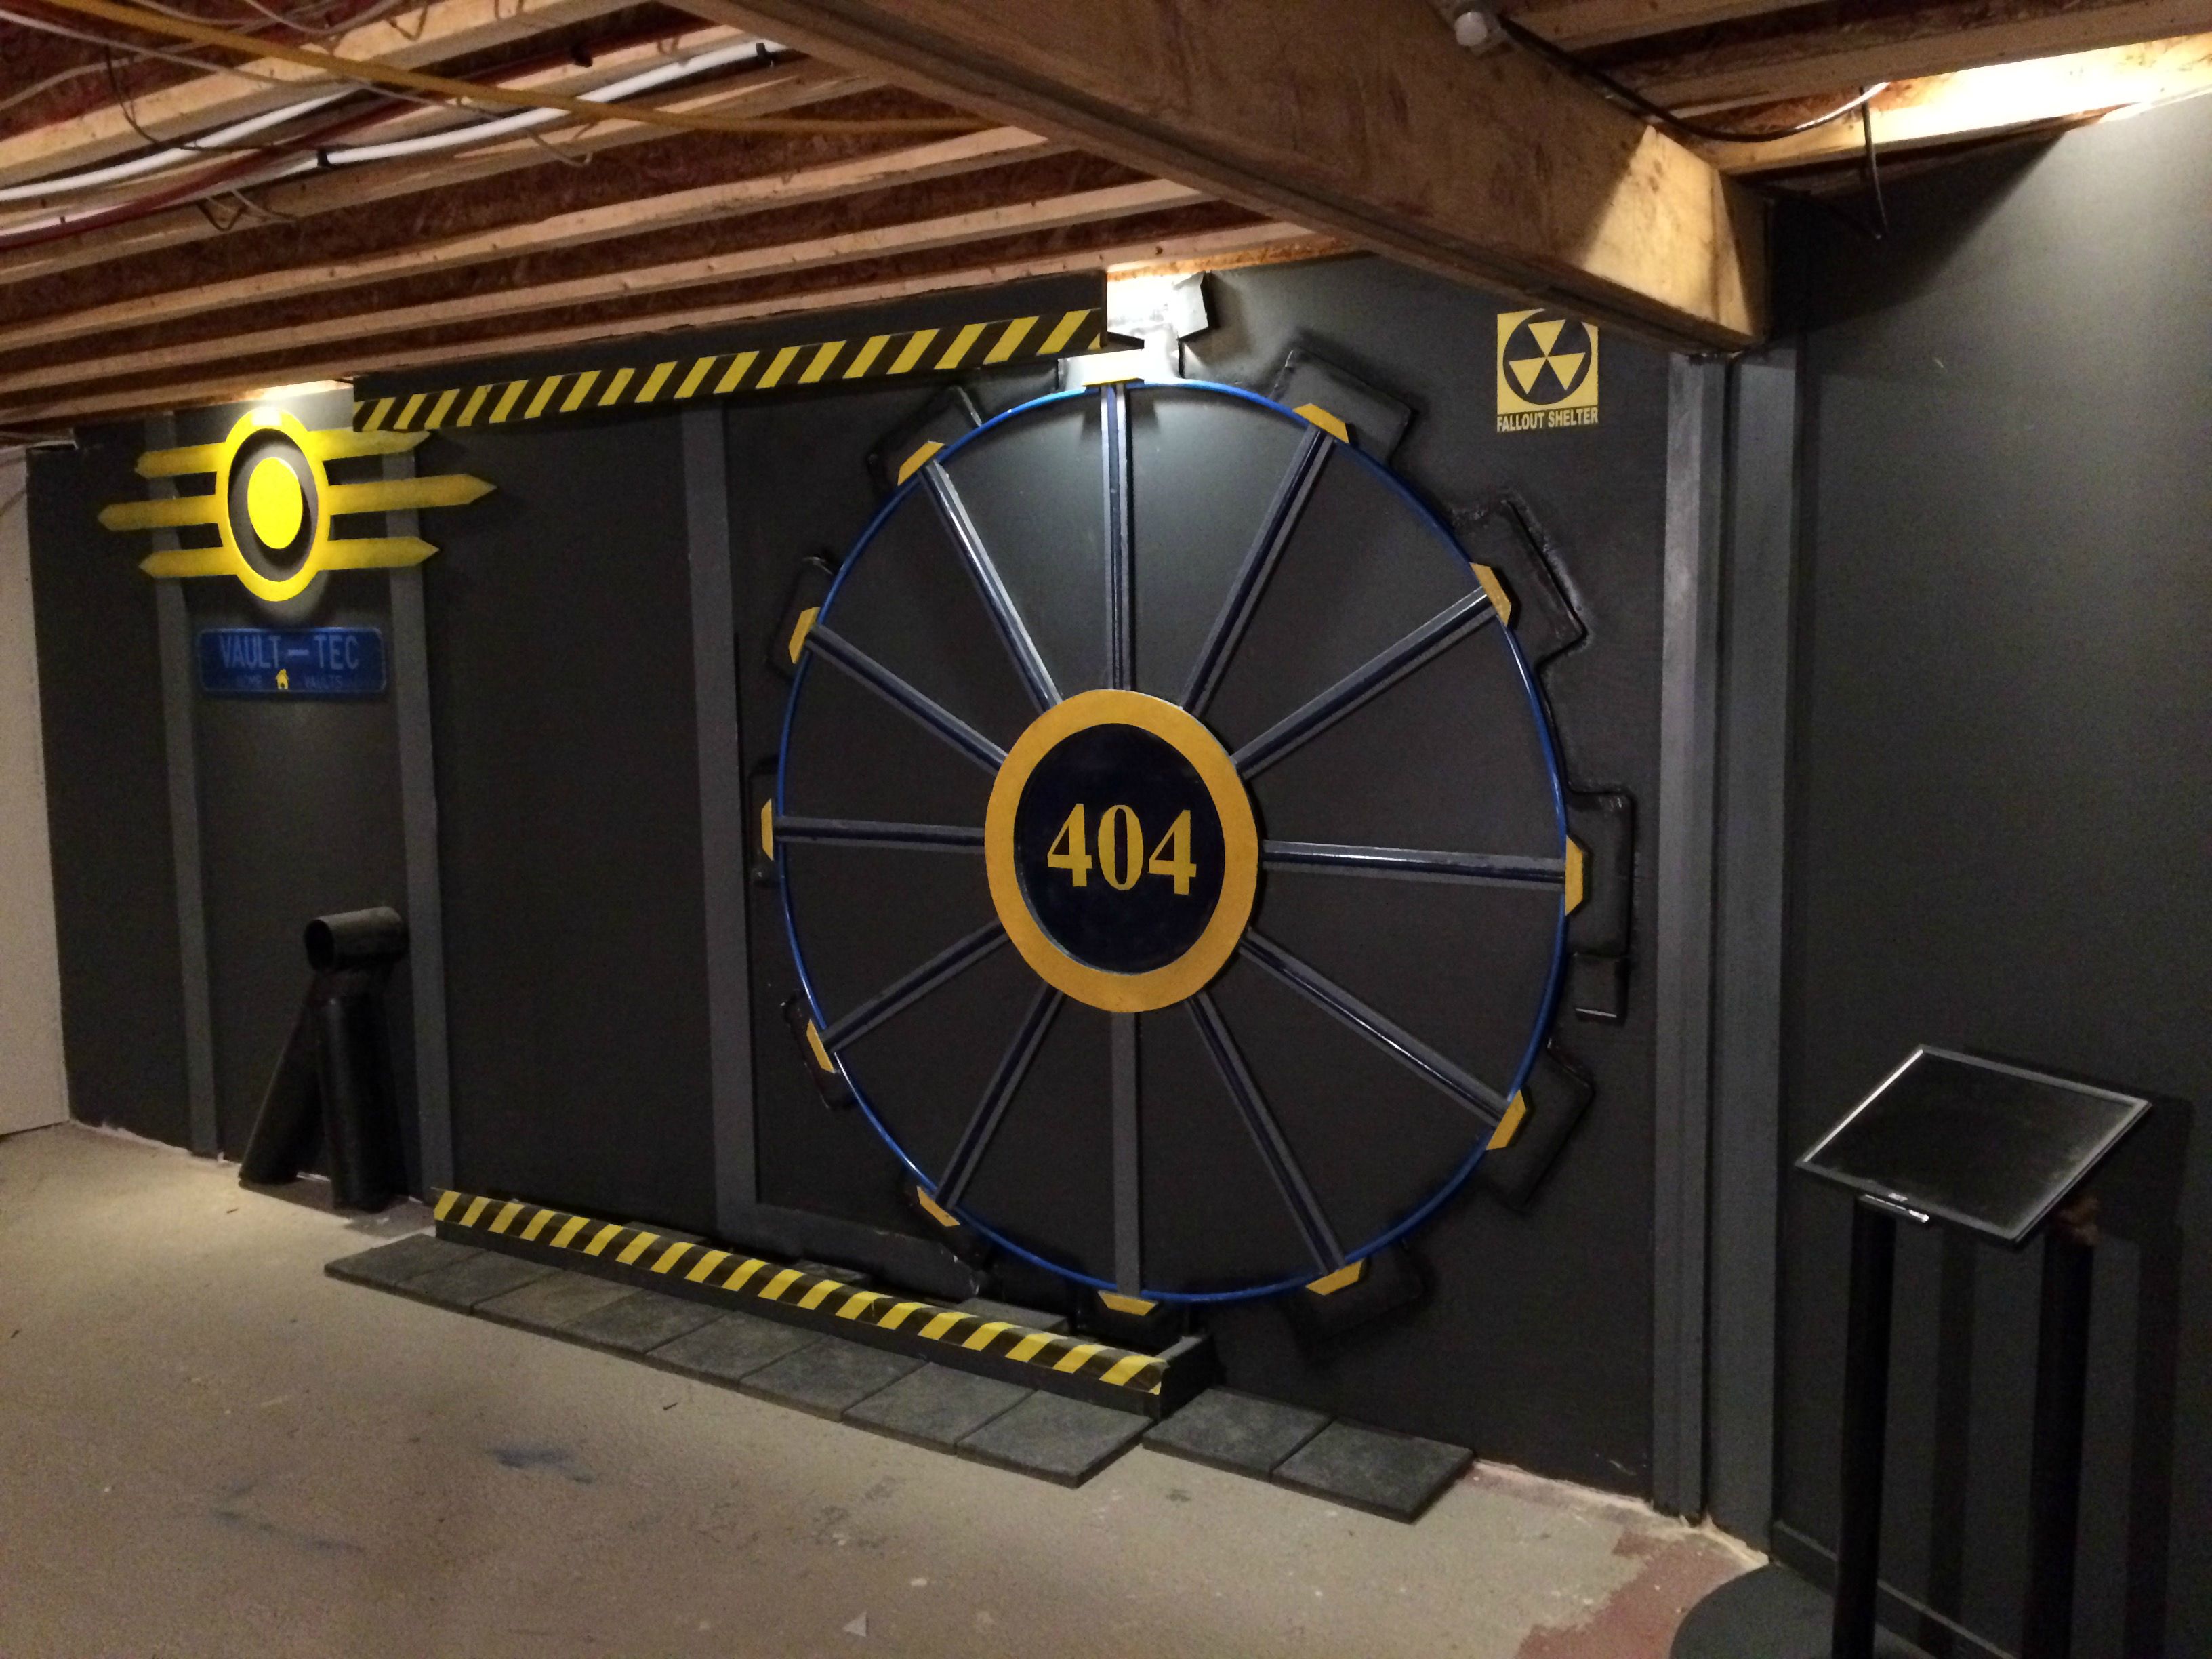 Guy Turns His Man Cave Into A Fallout Vault